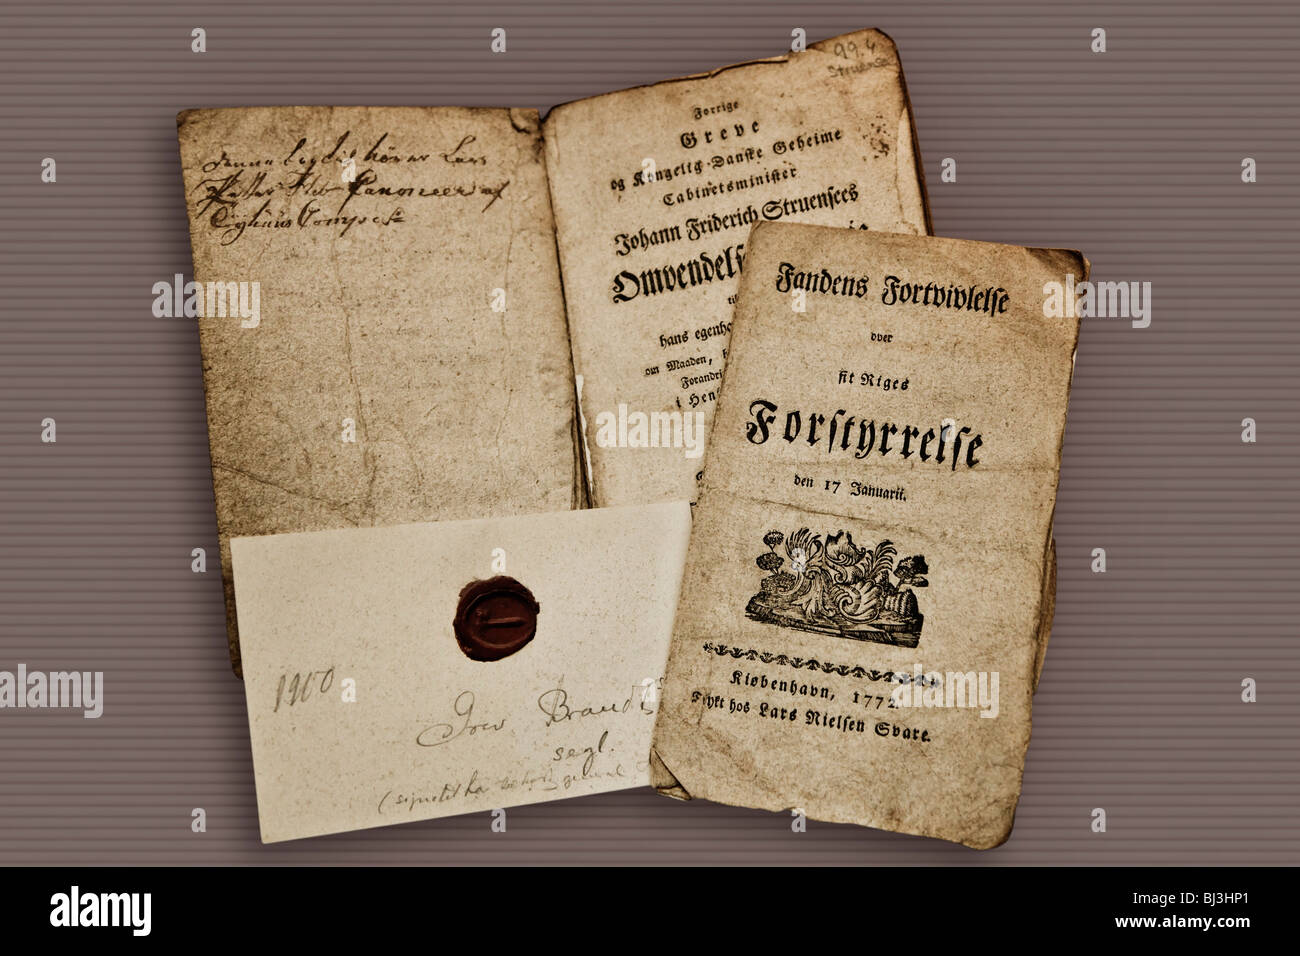 Old books and papers from 1772 Stock Photo